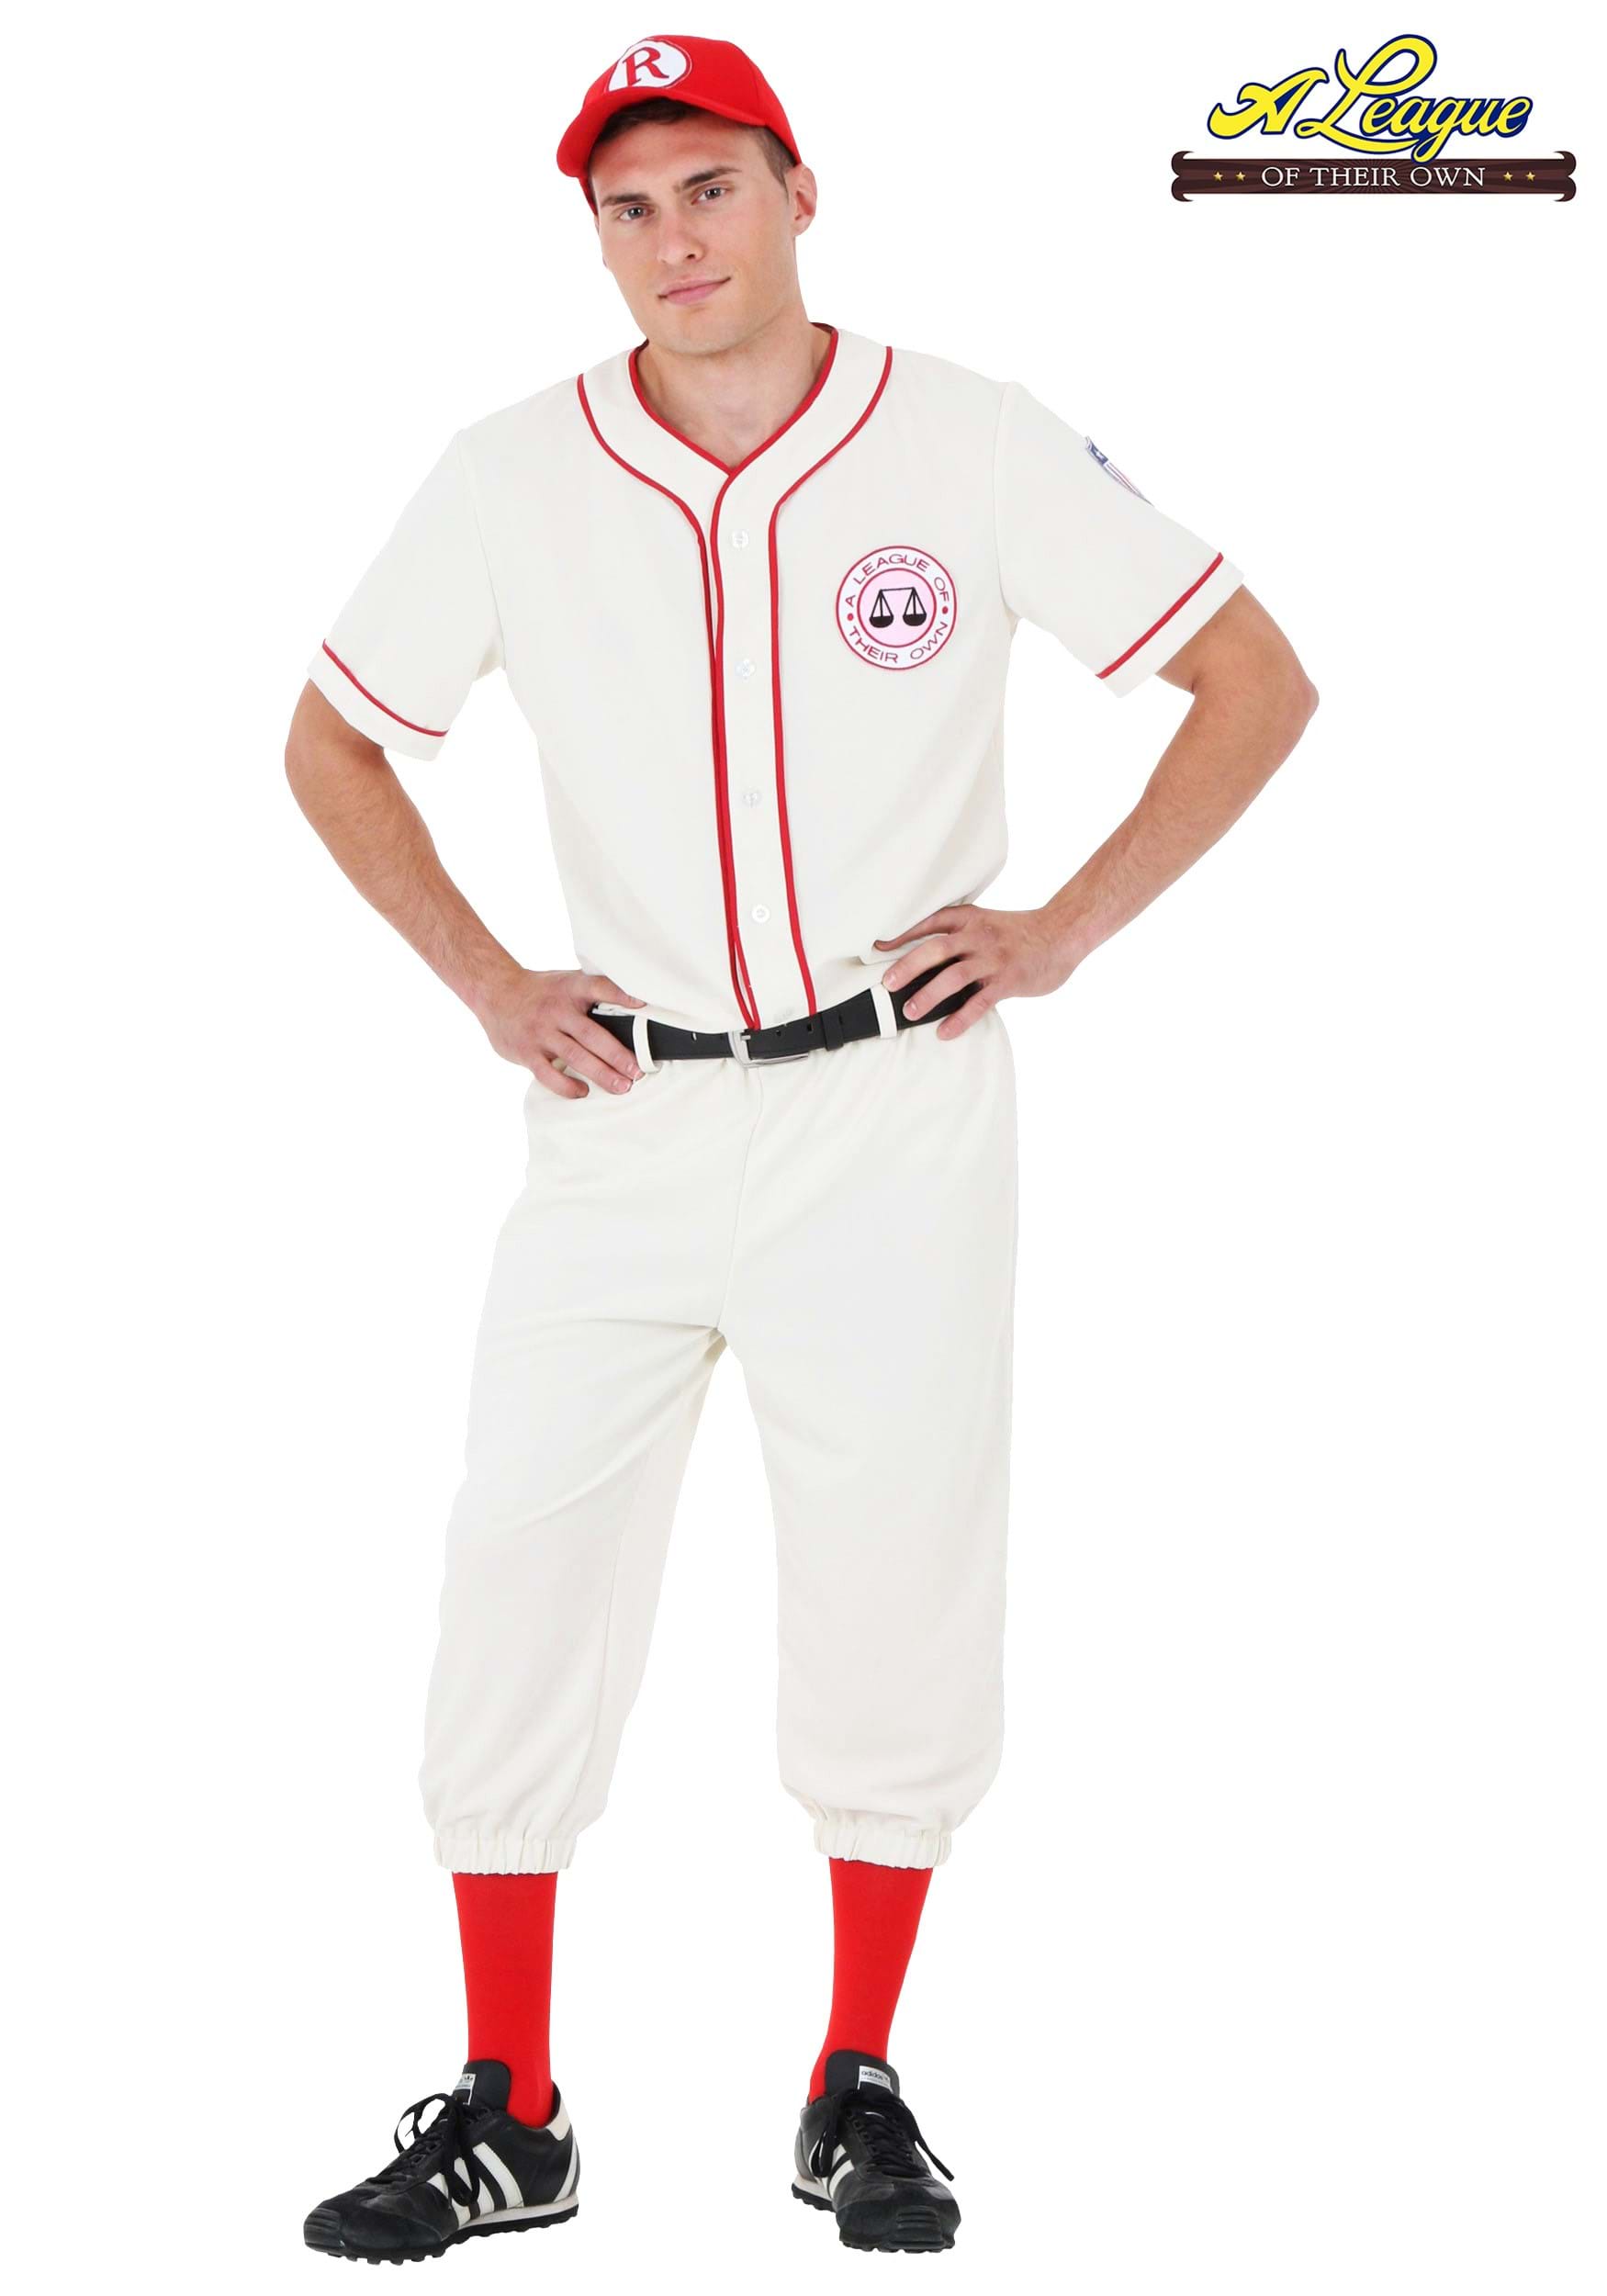 A League of Their Own Coach Jimmy Men's Costume